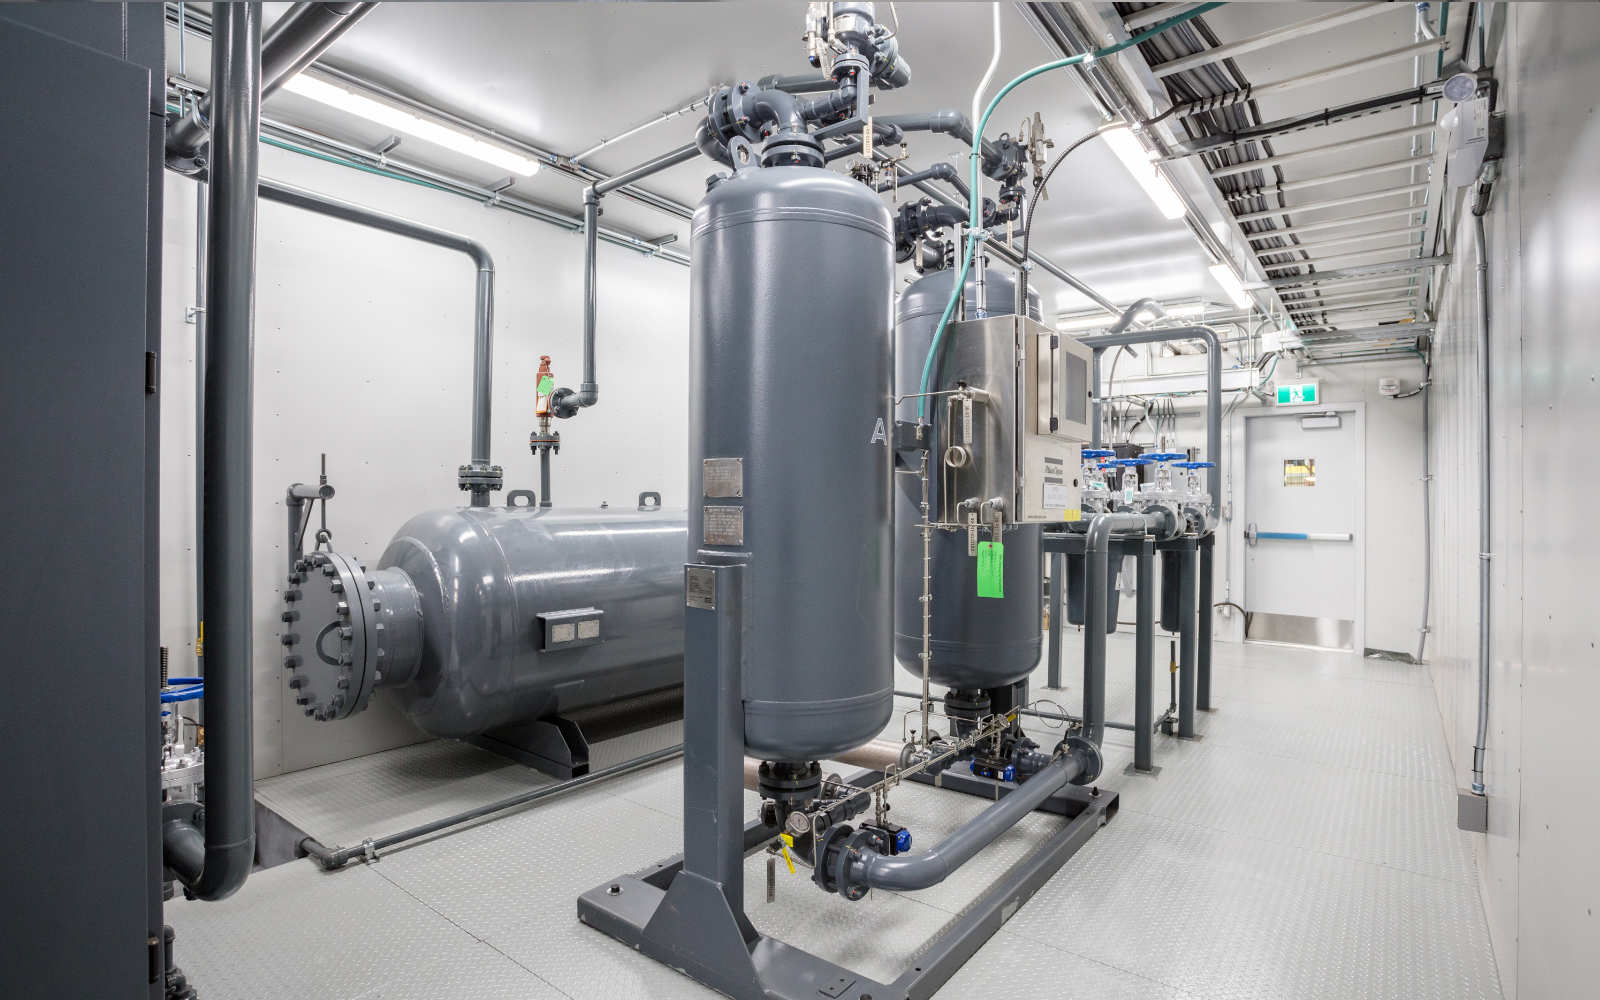 Altas Copco, ZT160 Compressors, CD350 Dryer, 3-way by-pass filtration system, 660USG receiver tank, Wireless Pressure and Temperature transmitters, Re-circulation exhausts ducting, PLC automatic control, built-in sump and pump drainage system, roll-up doors, electrical and controls systems, Fire Suppression and Detection, Prefabricated, Sonic Enclosures